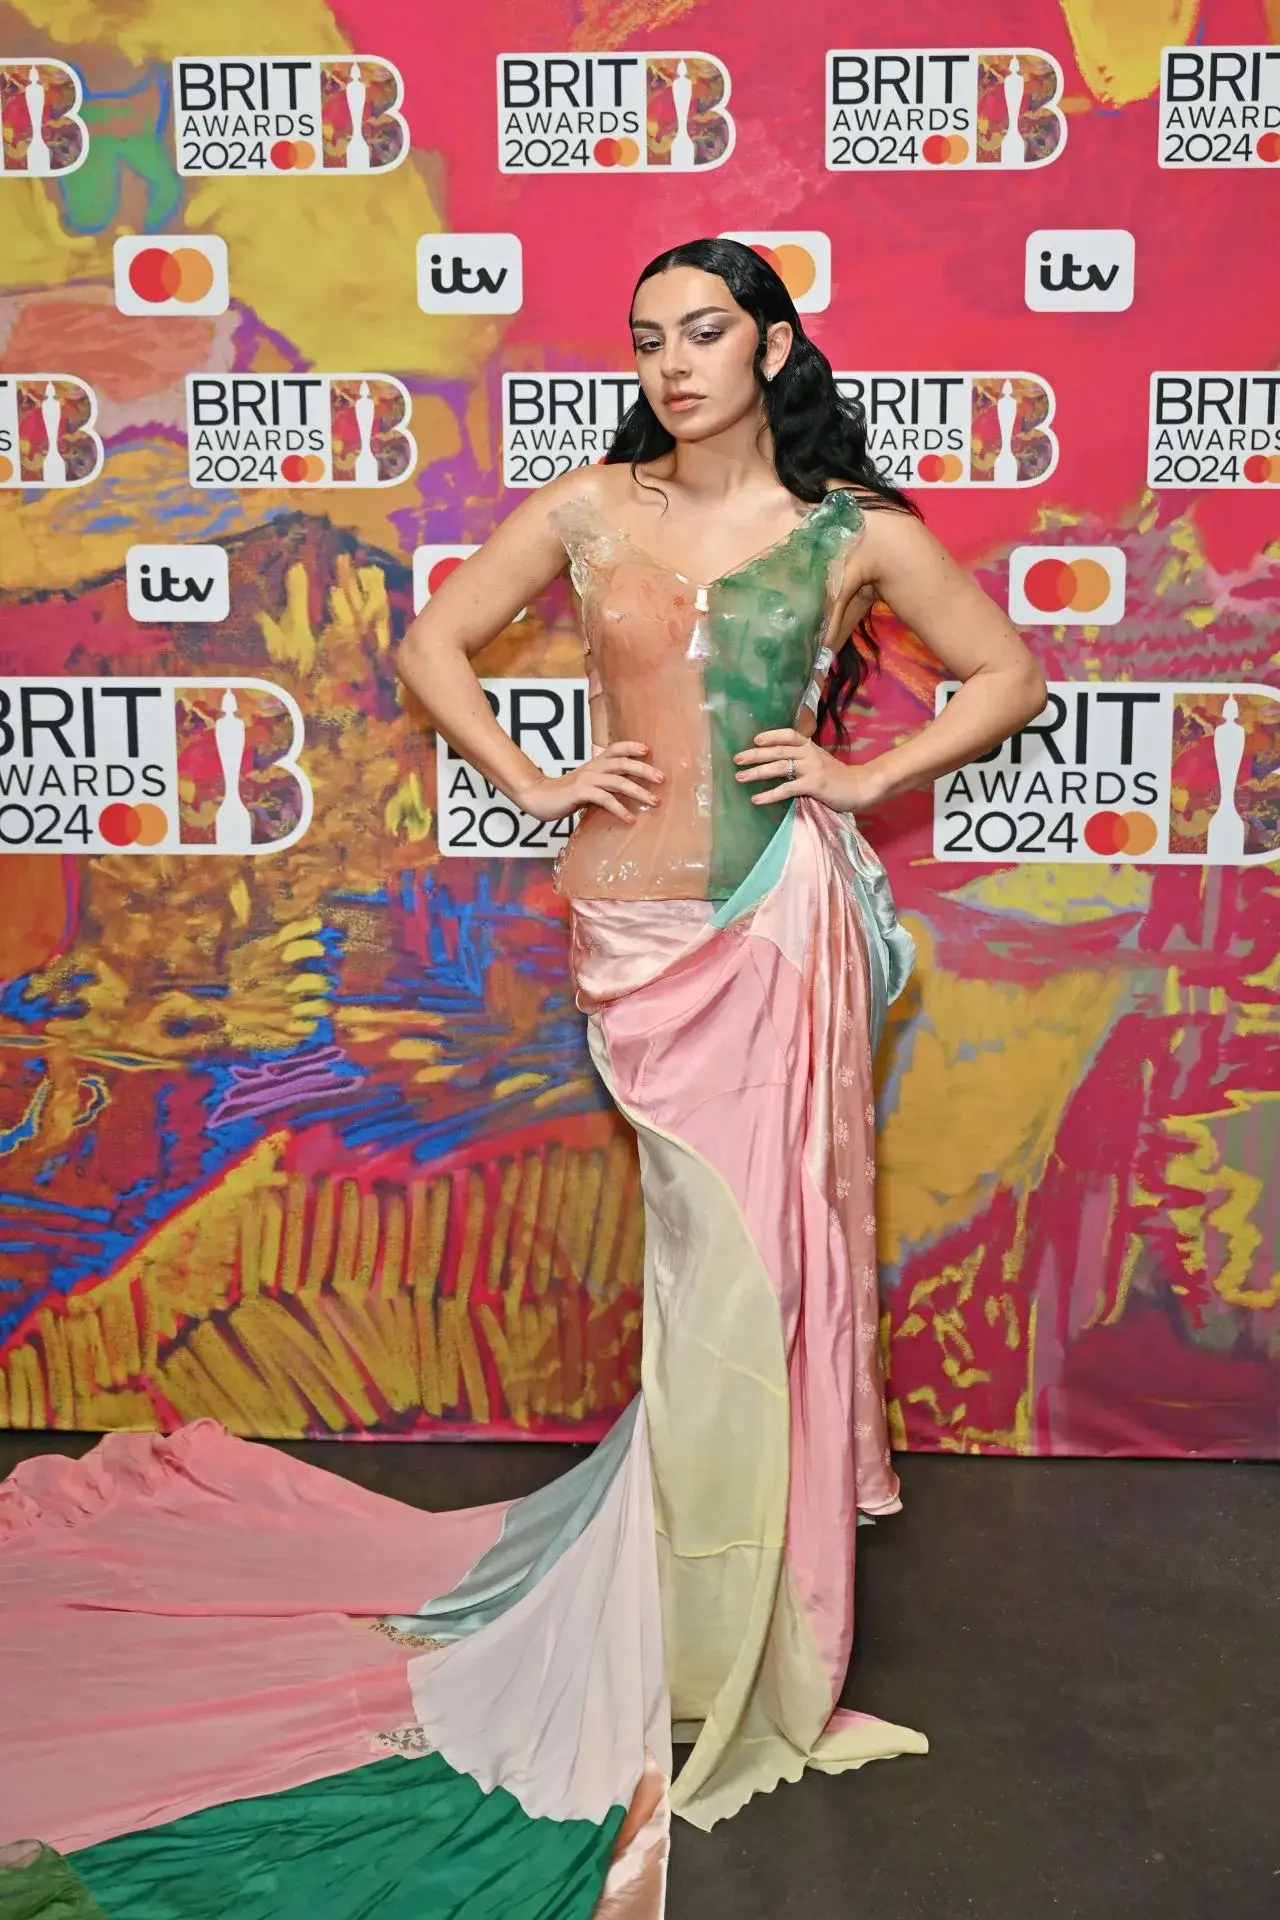 CHARLI XCX PHOTOSHOOT AT THE BRIT AWARDS 2024 IN LONDON 4